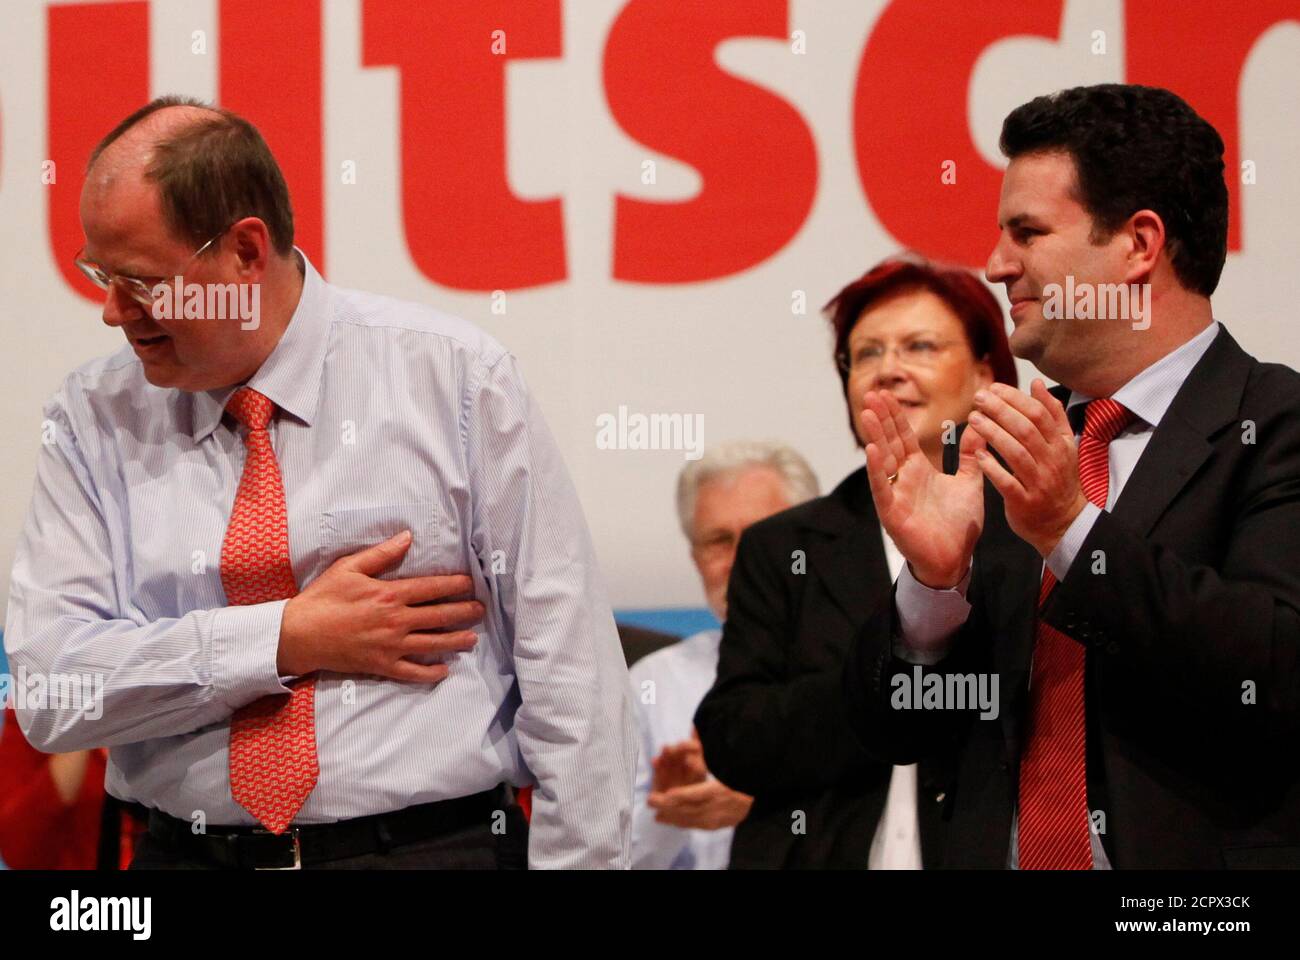 Leading SPD members Hubertus Heil (R) and Brigitte Zypris (2nd R) bid farewell to Peer Steinbrueck after he was relieved from his party office, at a party congress in Dresden, November 14, 2009. Germany's Social Democrats, knocked out of government in September, elected former environment minister Sigmar Gabriel as their seventh new leader in the last 10 years on Friday at a tense party congress. The painting shows former party leader, the late Willi Brandt.   REUTERS/Thomas Peter (GERMANY - Tags: POLITICS) Stock Photo